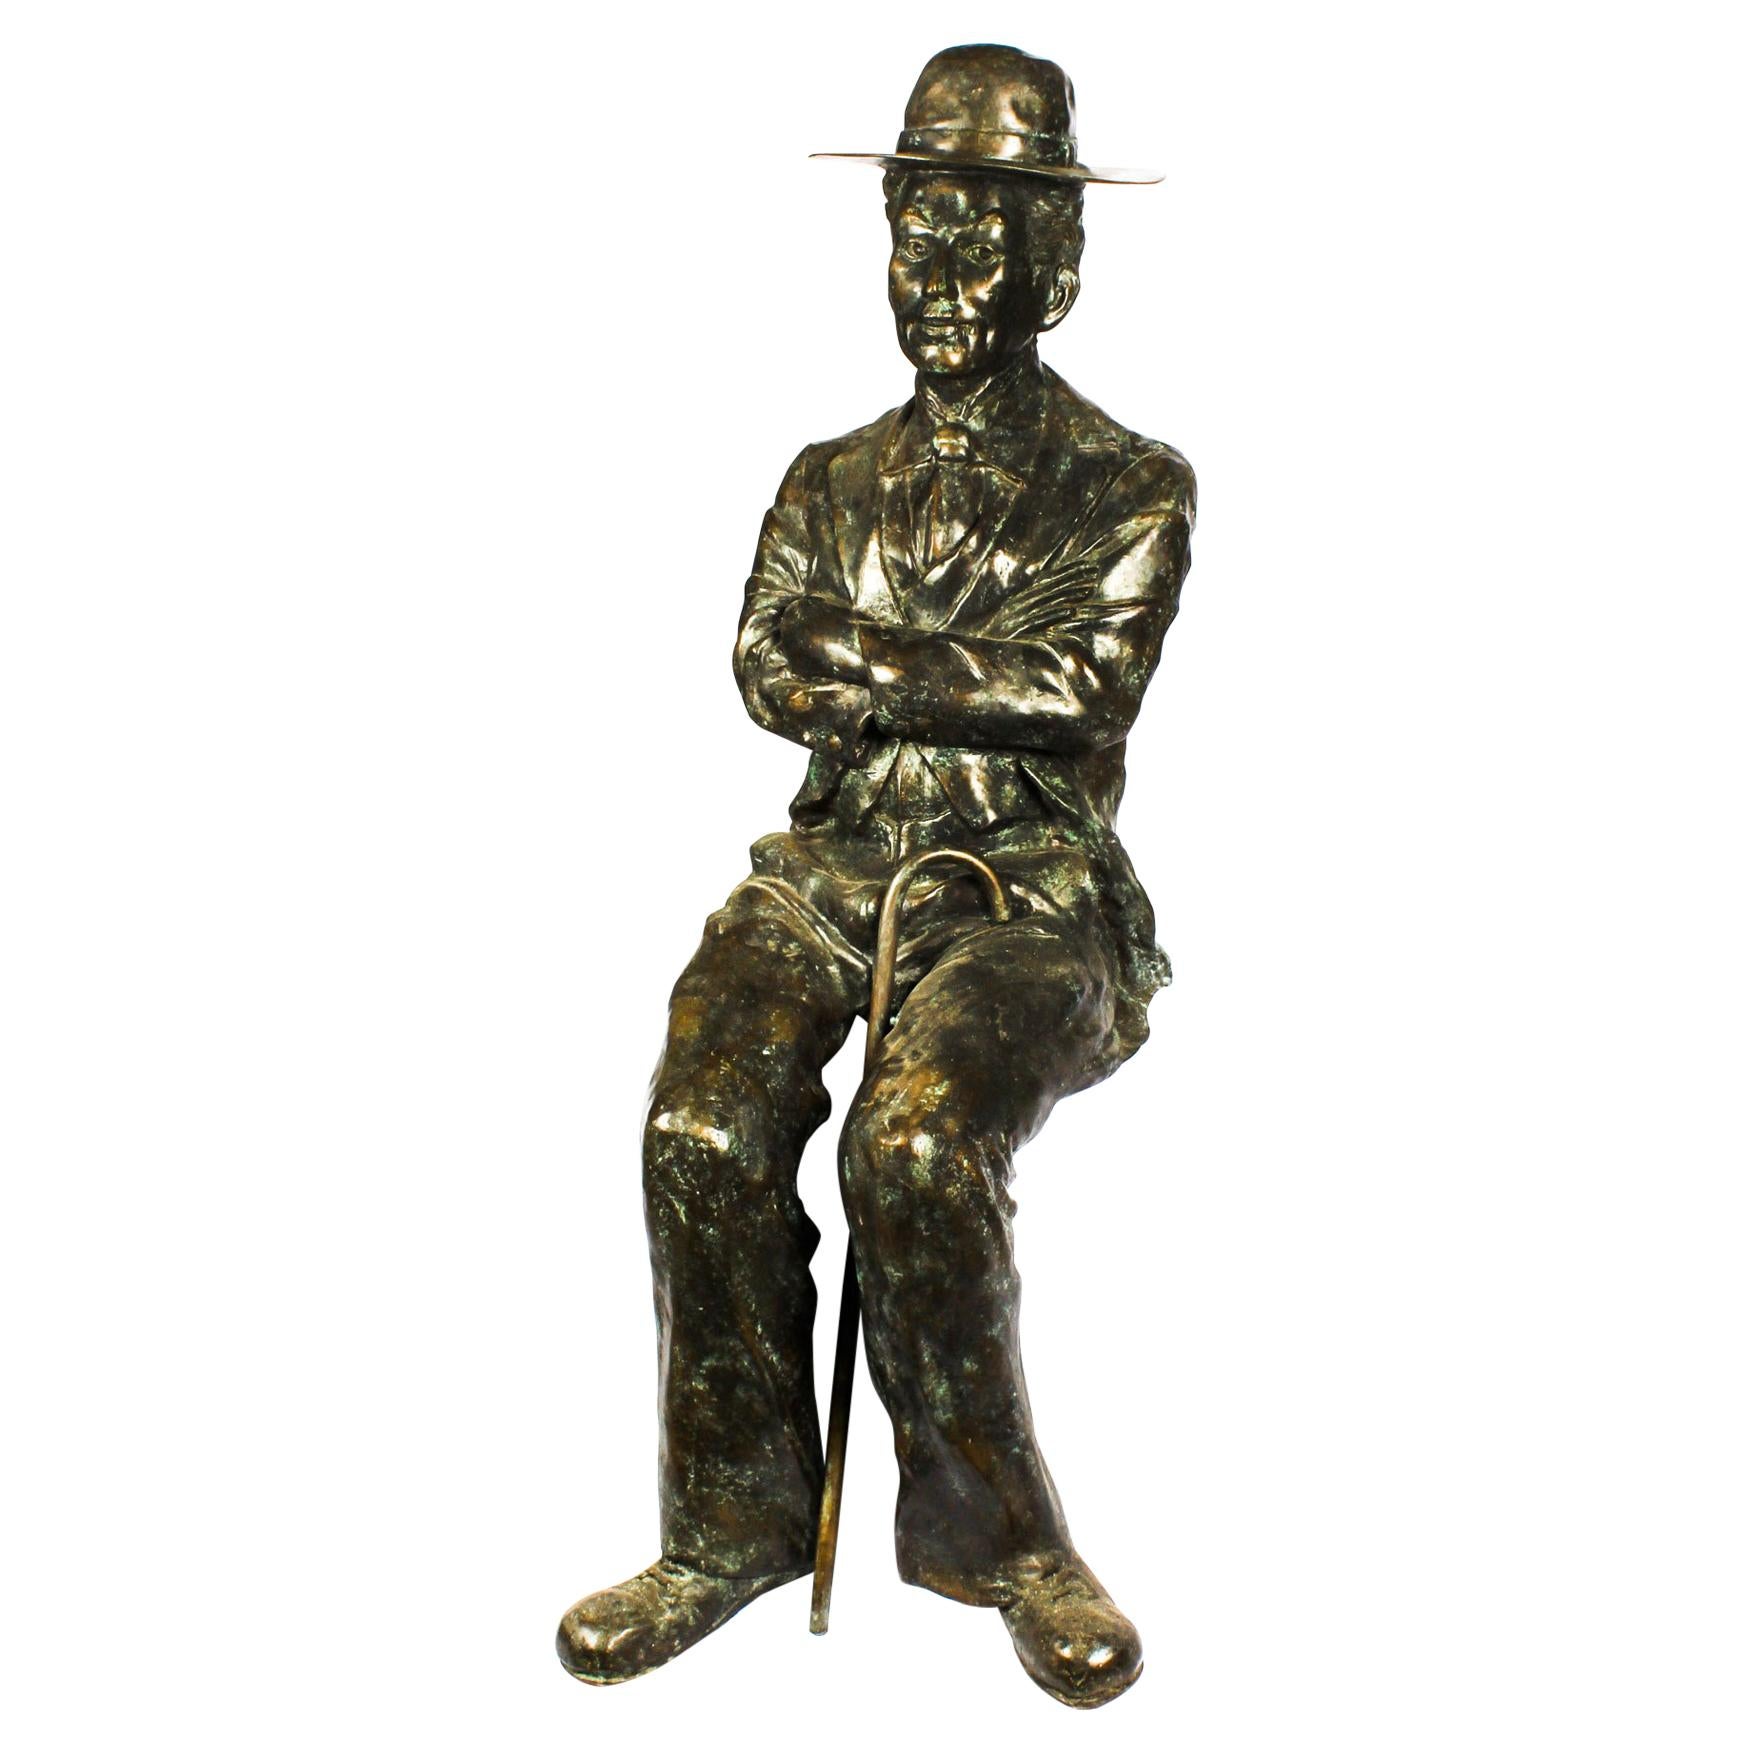 Life-Size Bronze Sculpture of Seated Charlie Chaplin, 20th Century